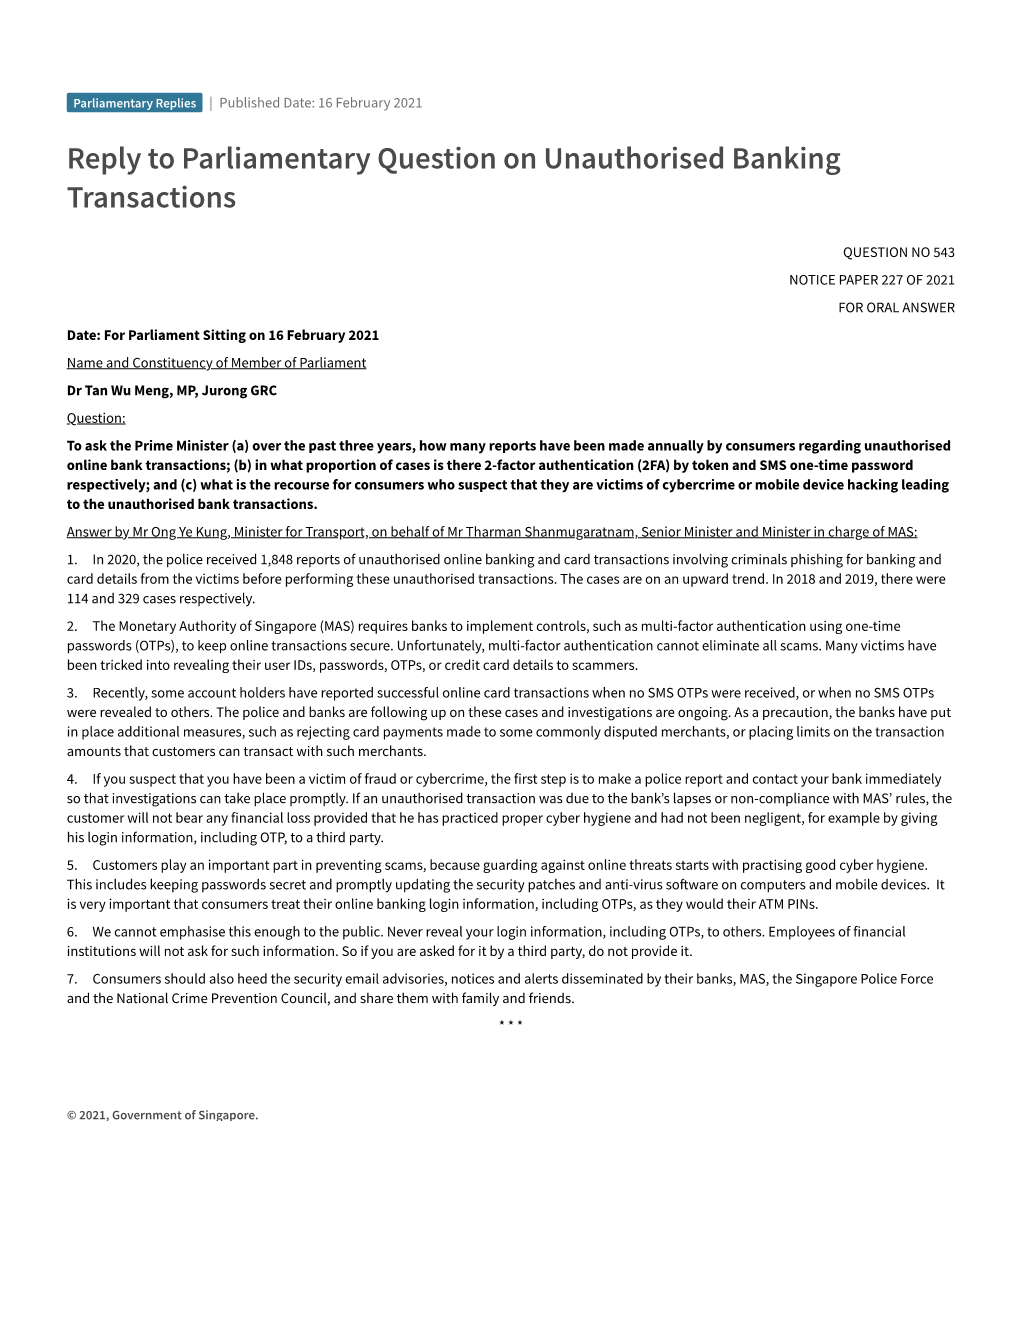 Reply to Parliamentary Question on Unauthorised Banking Transactions